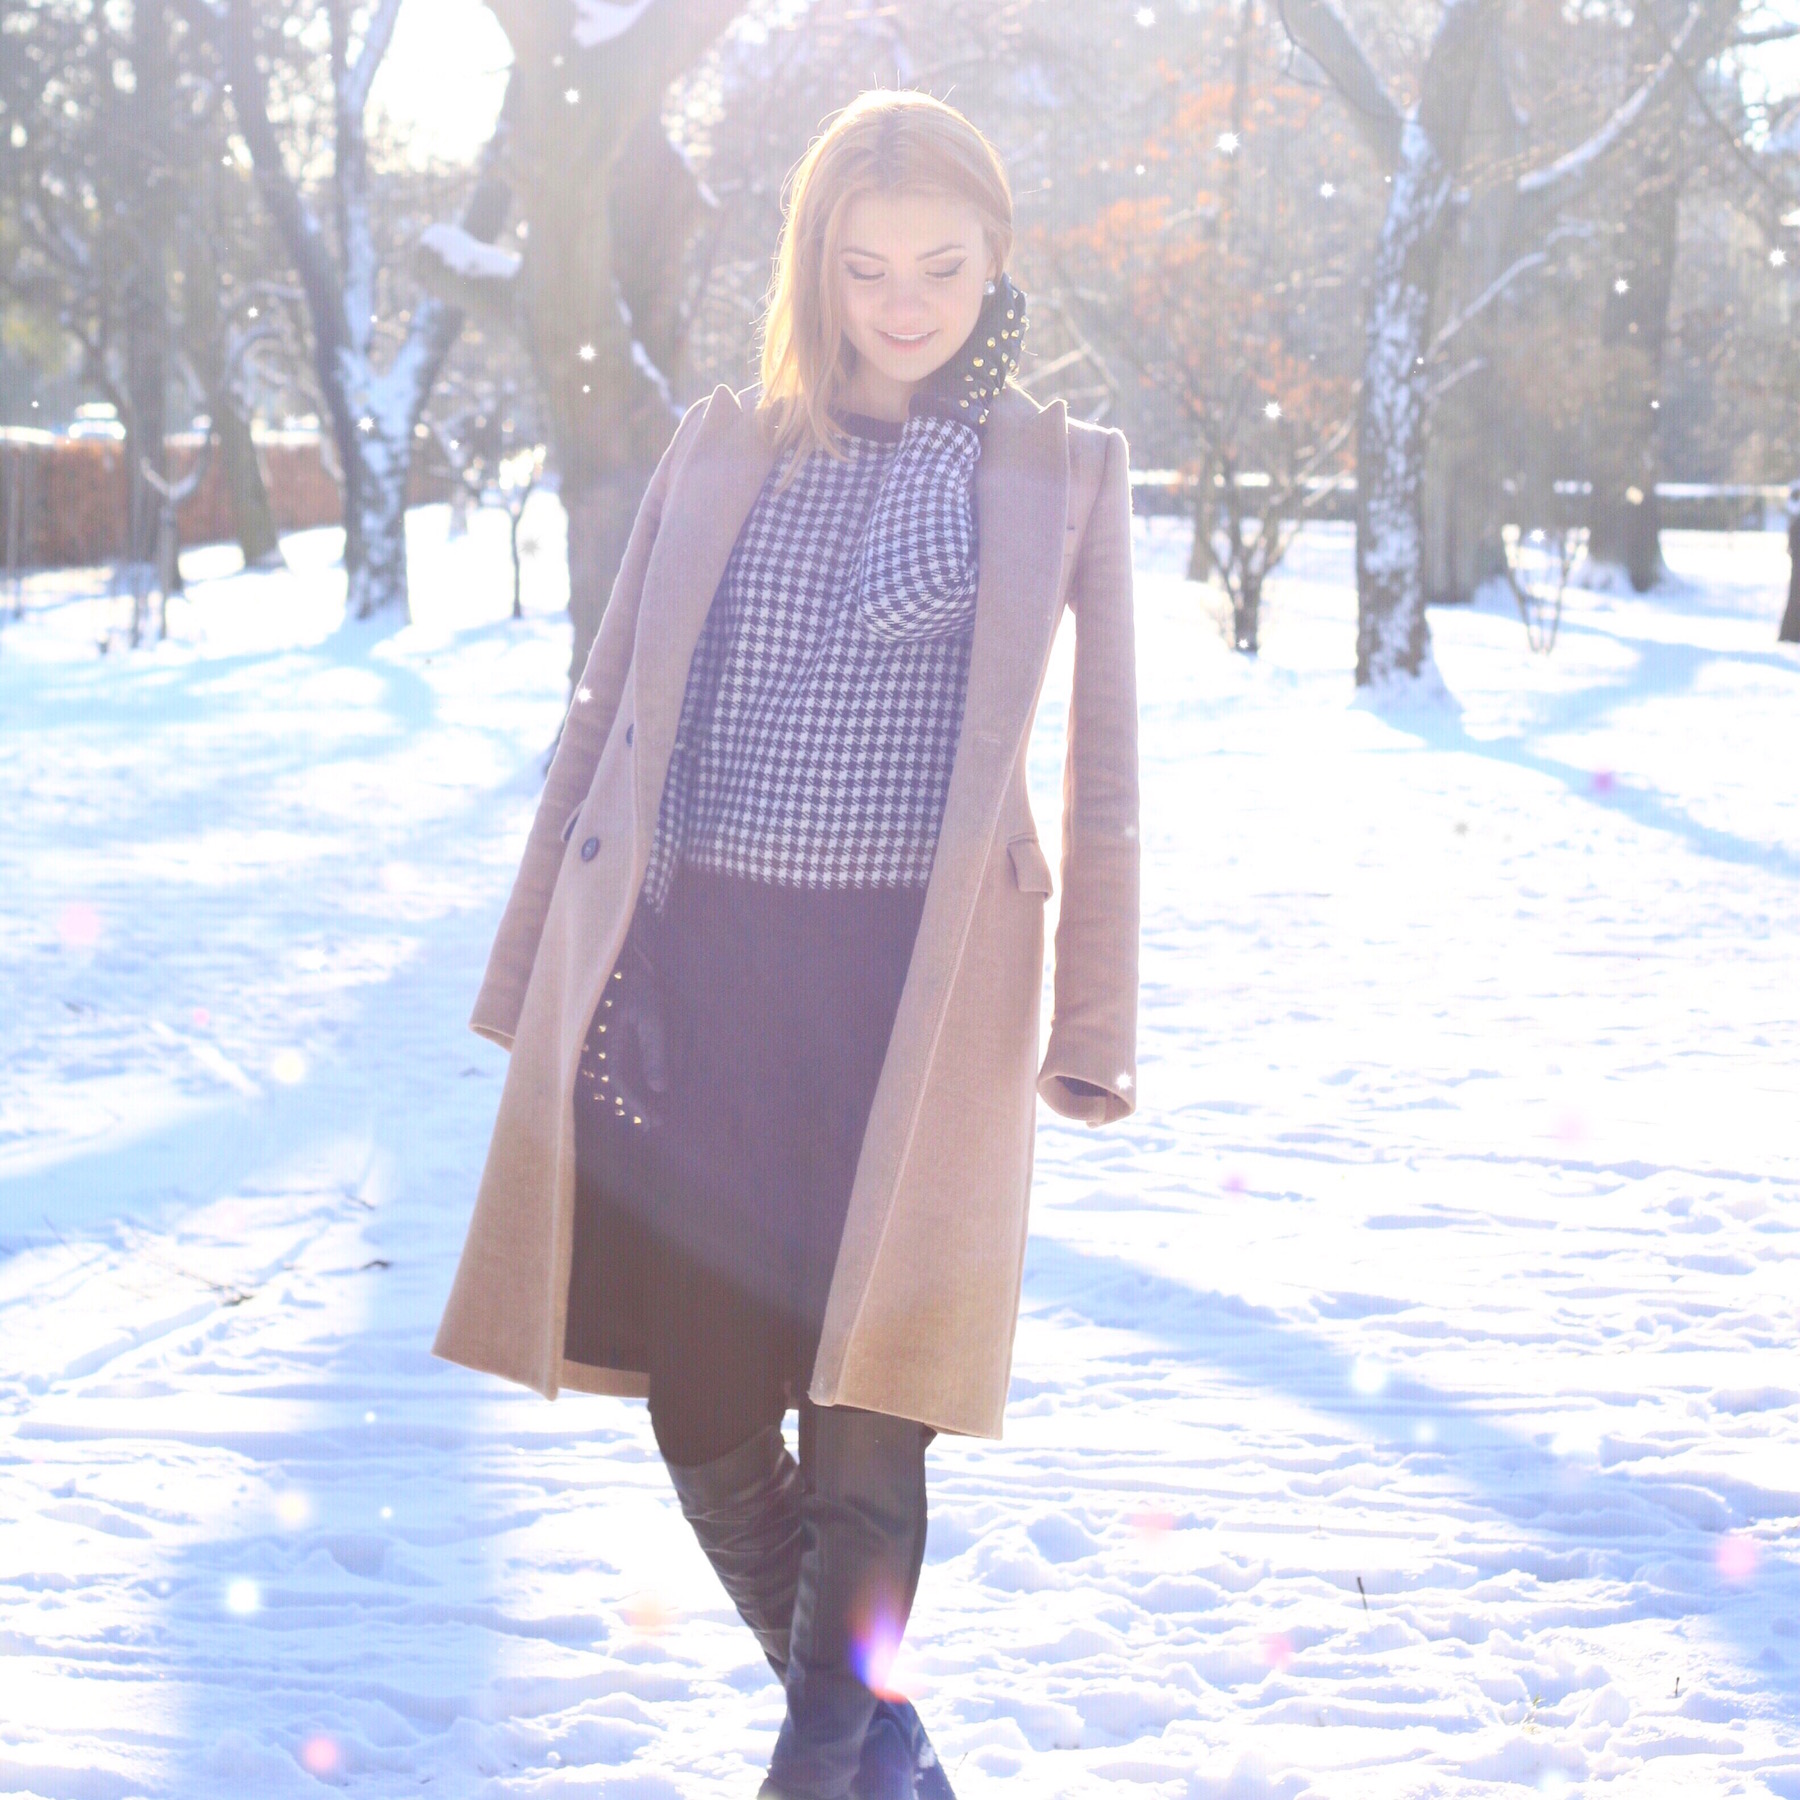 Juliana Chow Fashion Lifestyle Blog Model Winter Snow Outfit 6